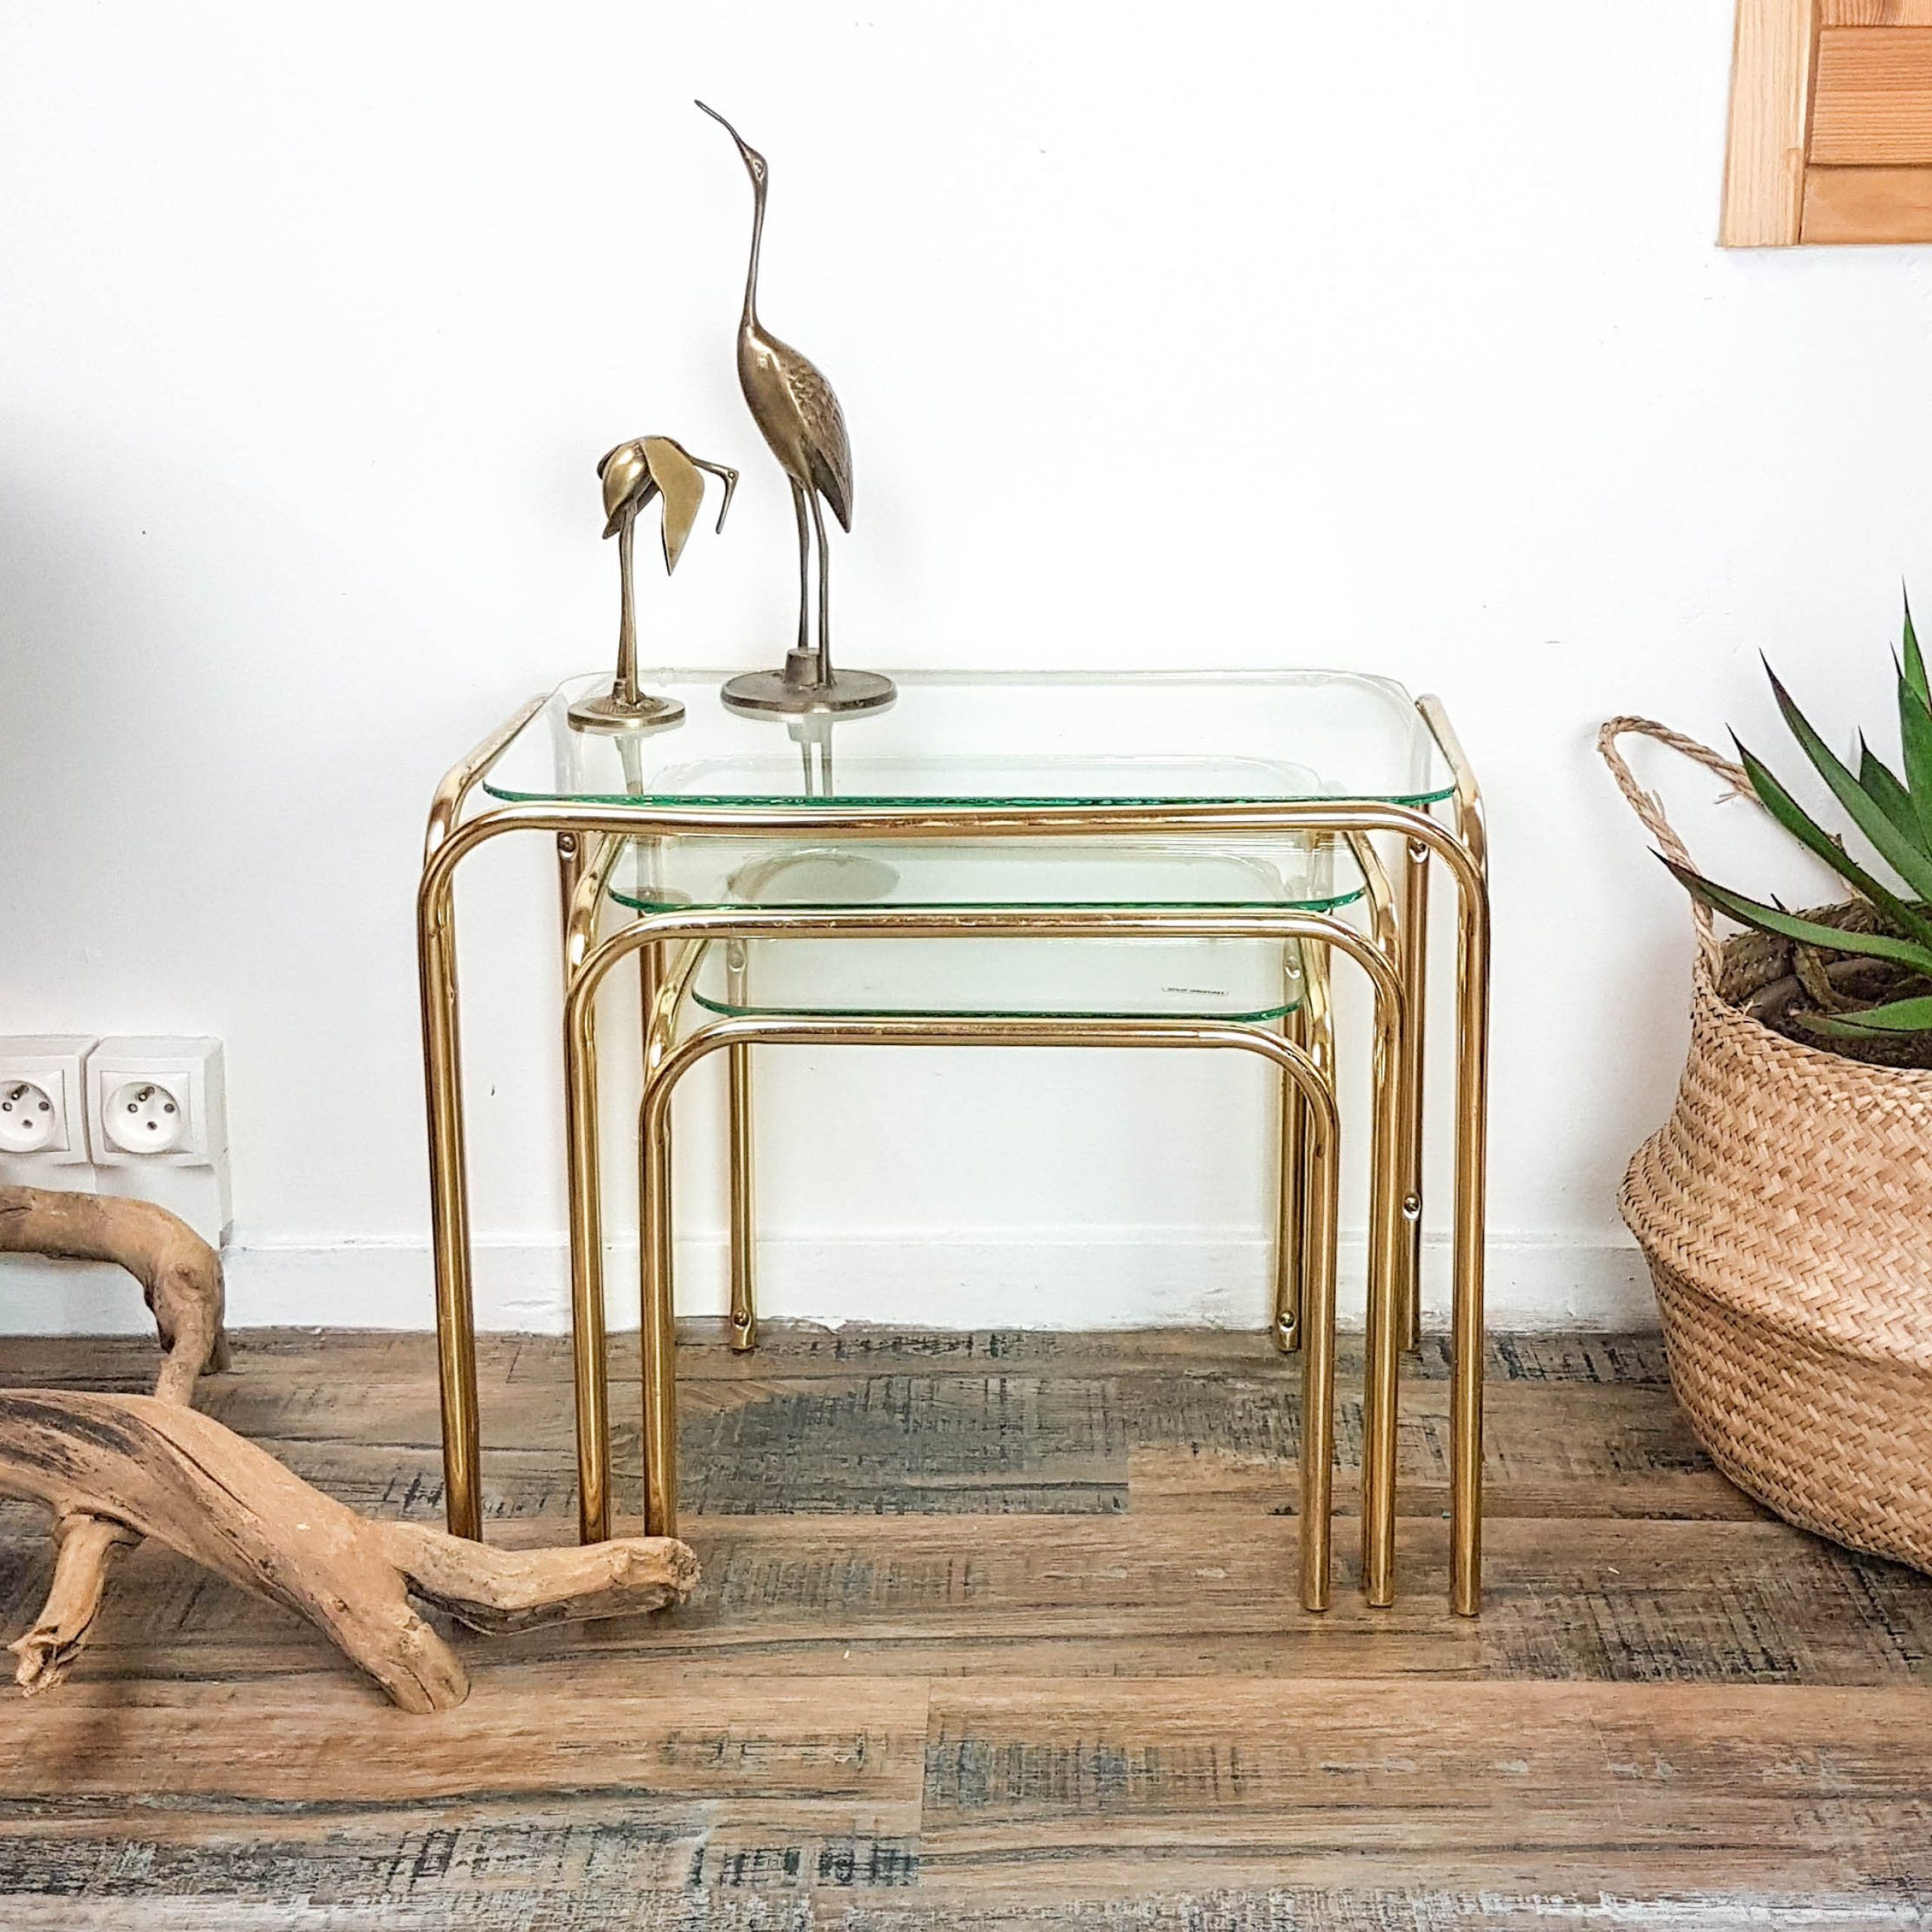 Antique Gold And Glass Console Tables In Favorite Set Of 3 Vintage Nesting Tables In Glass And Brass Art (View 1 of 10)